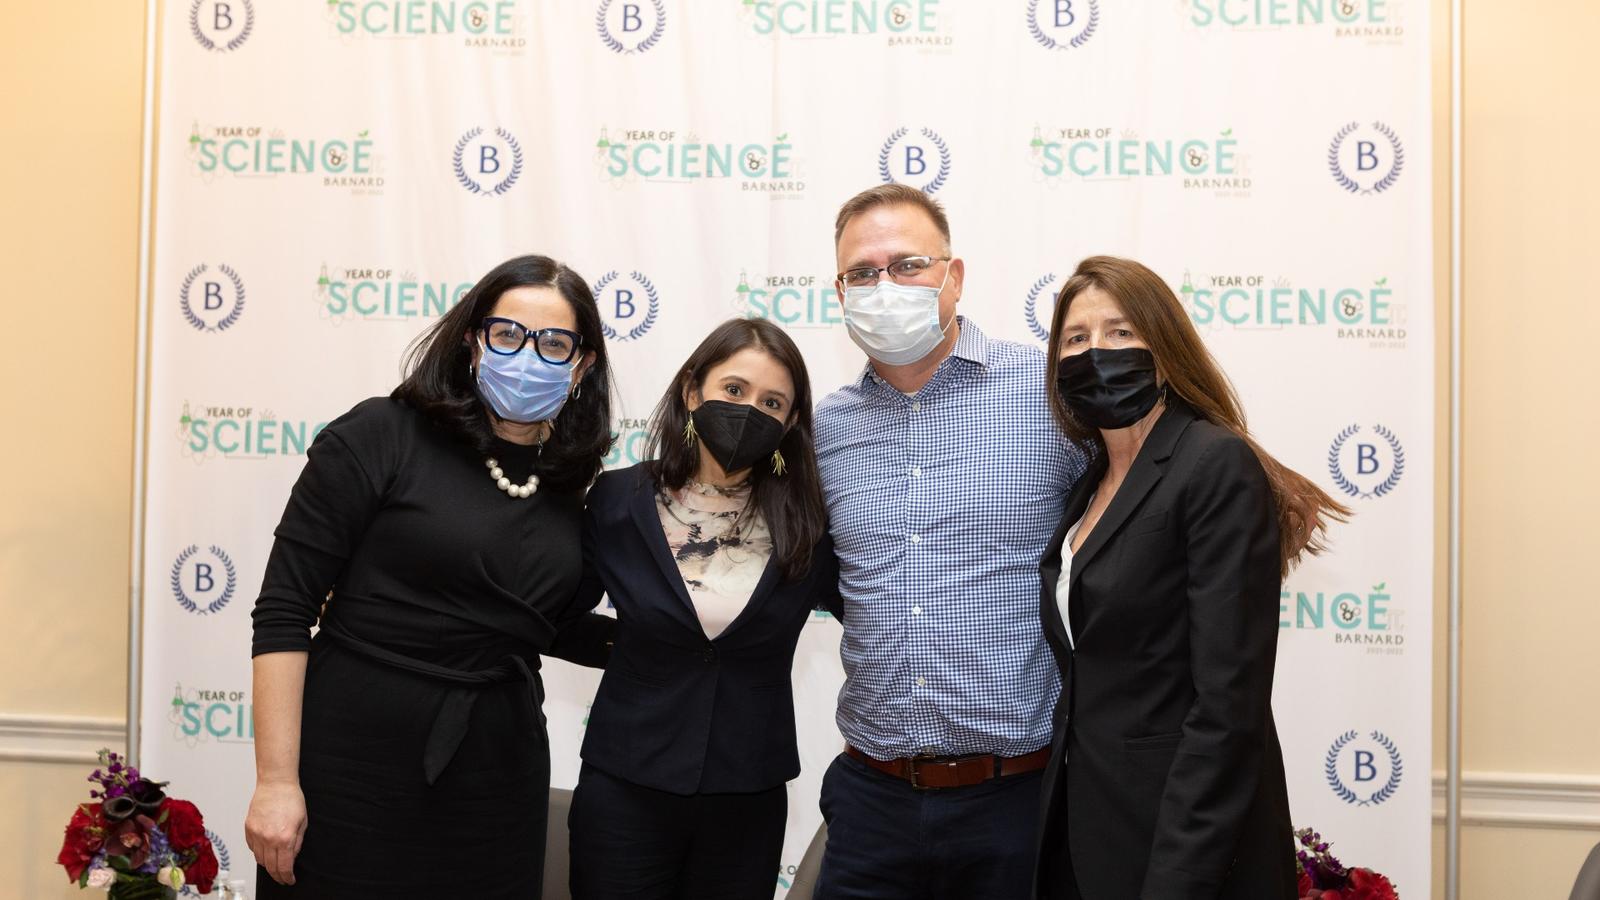 Four masked panelists stand in front of a backdrop with the Year of Science logo on it